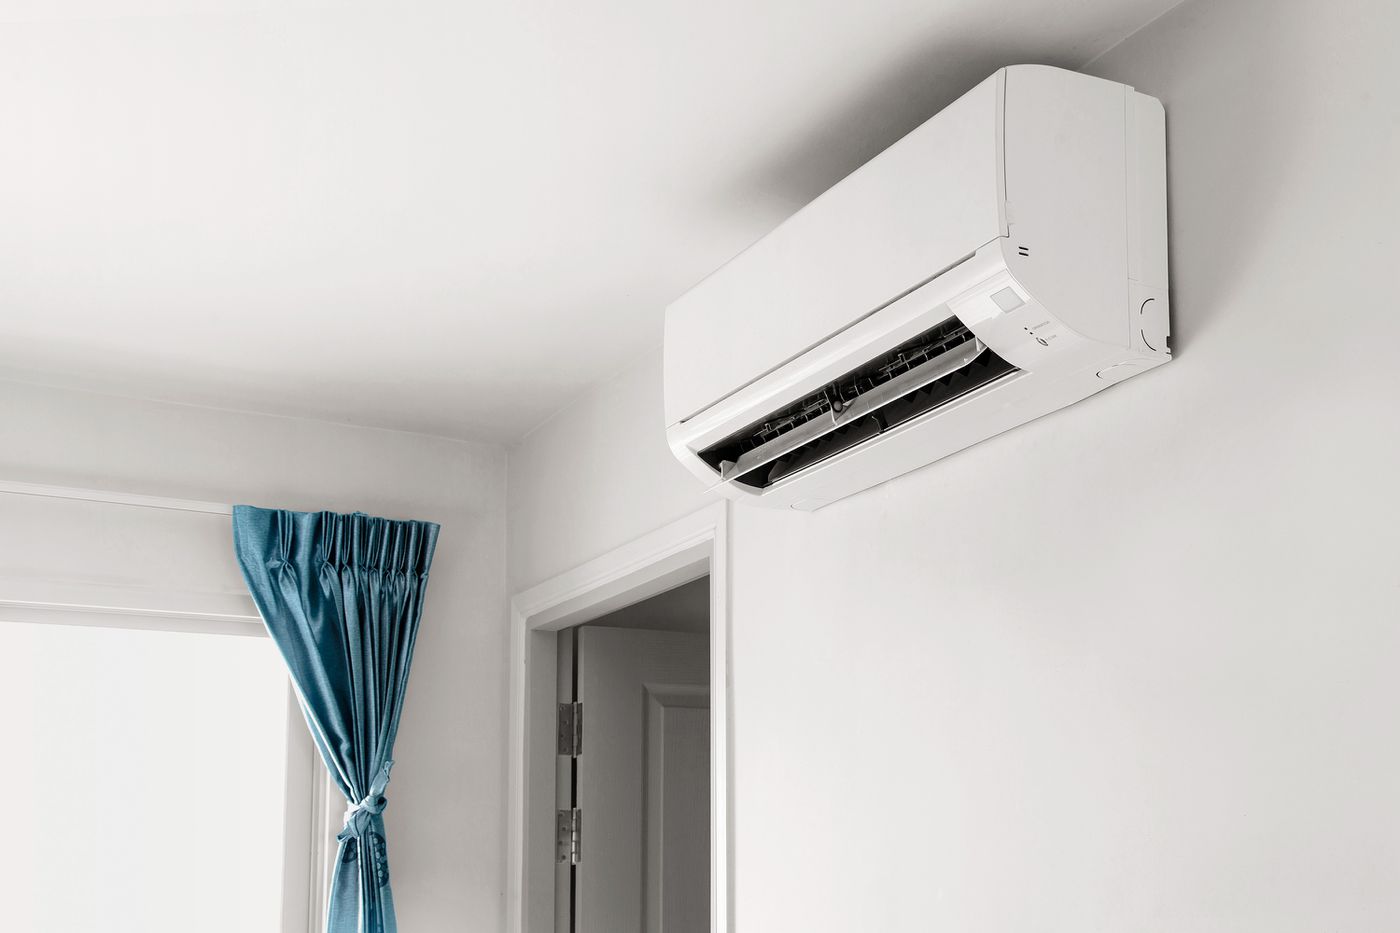 Best Air Conditioning for Home